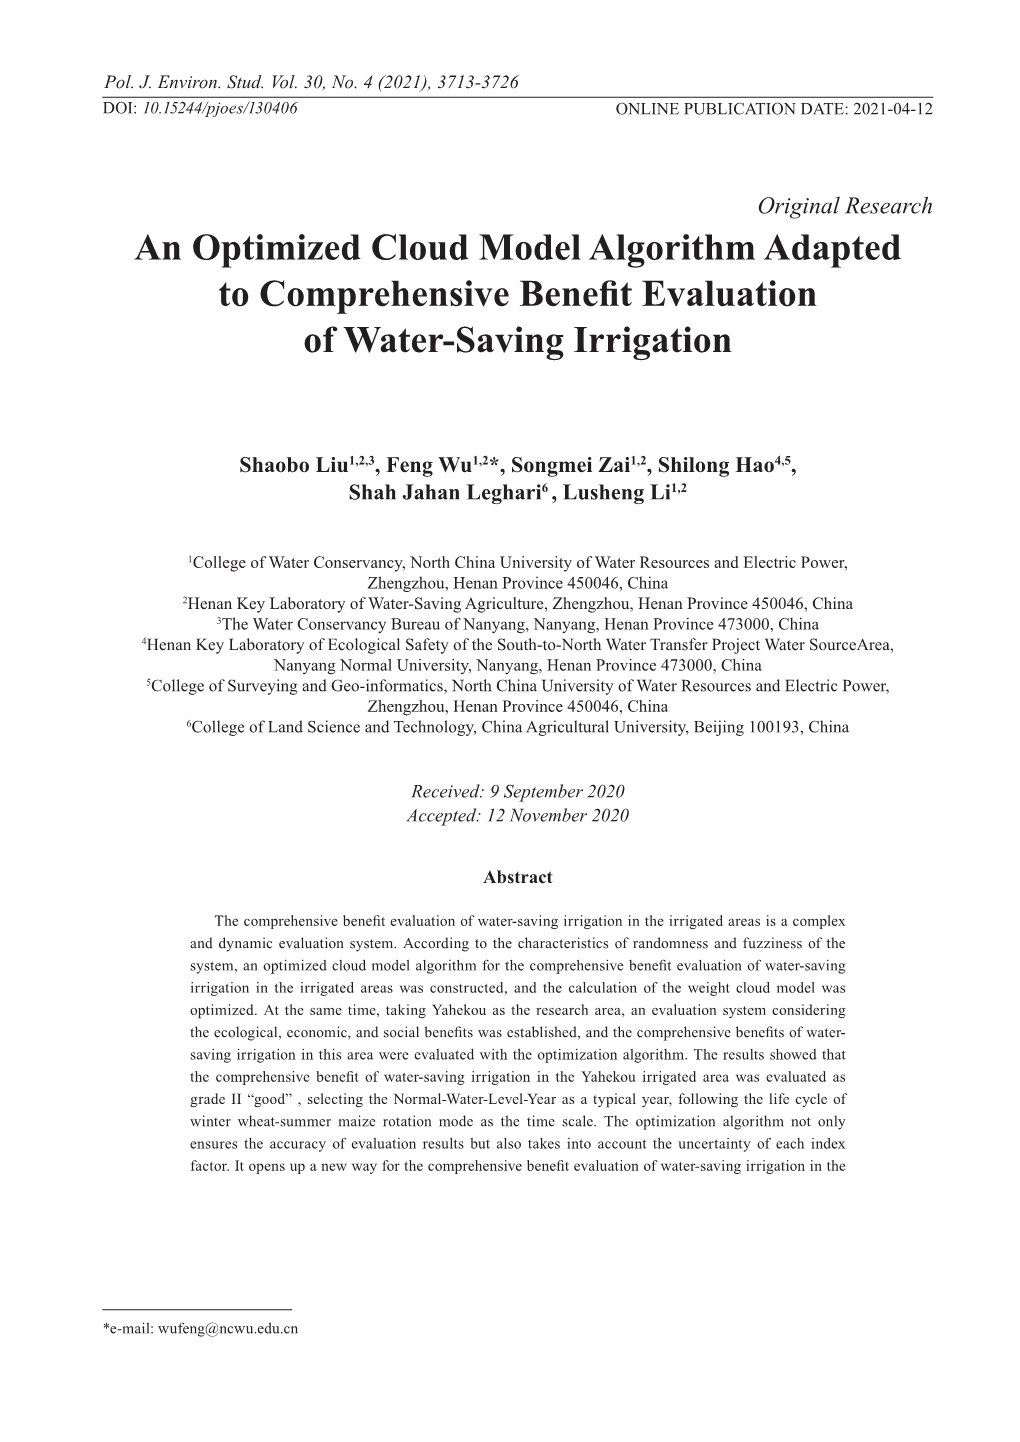 An Optimized Cloud Model Algorithm Adapted to Comprehensive Benefit Evaluation of Water-Saving Irrigation